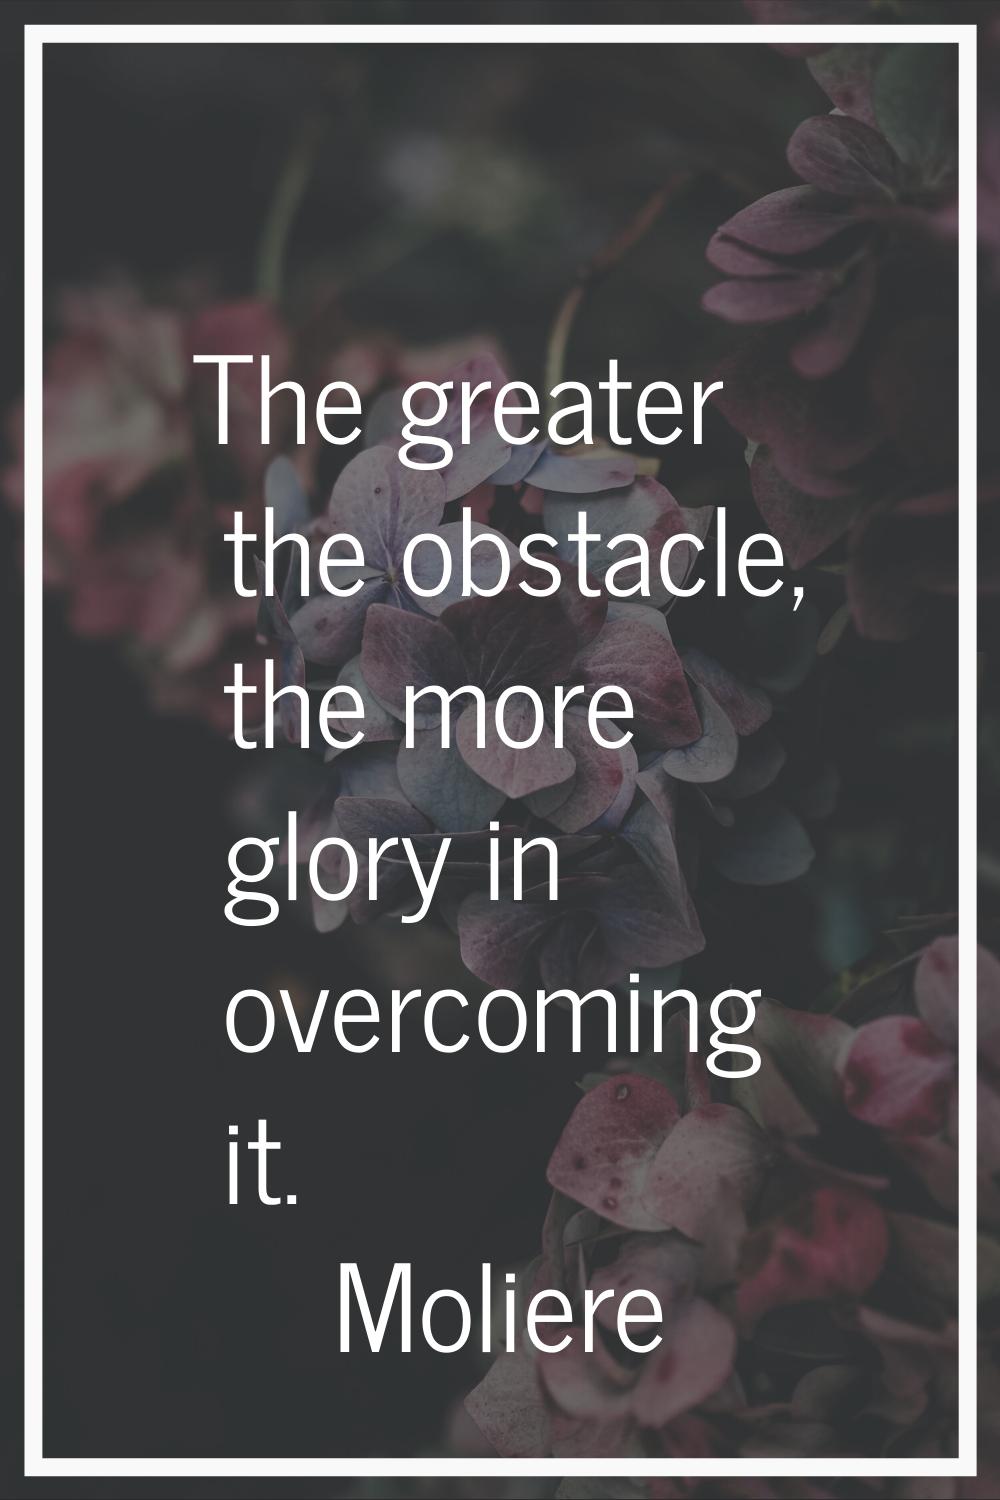 The greater the obstacle, the more glory in overcoming it.